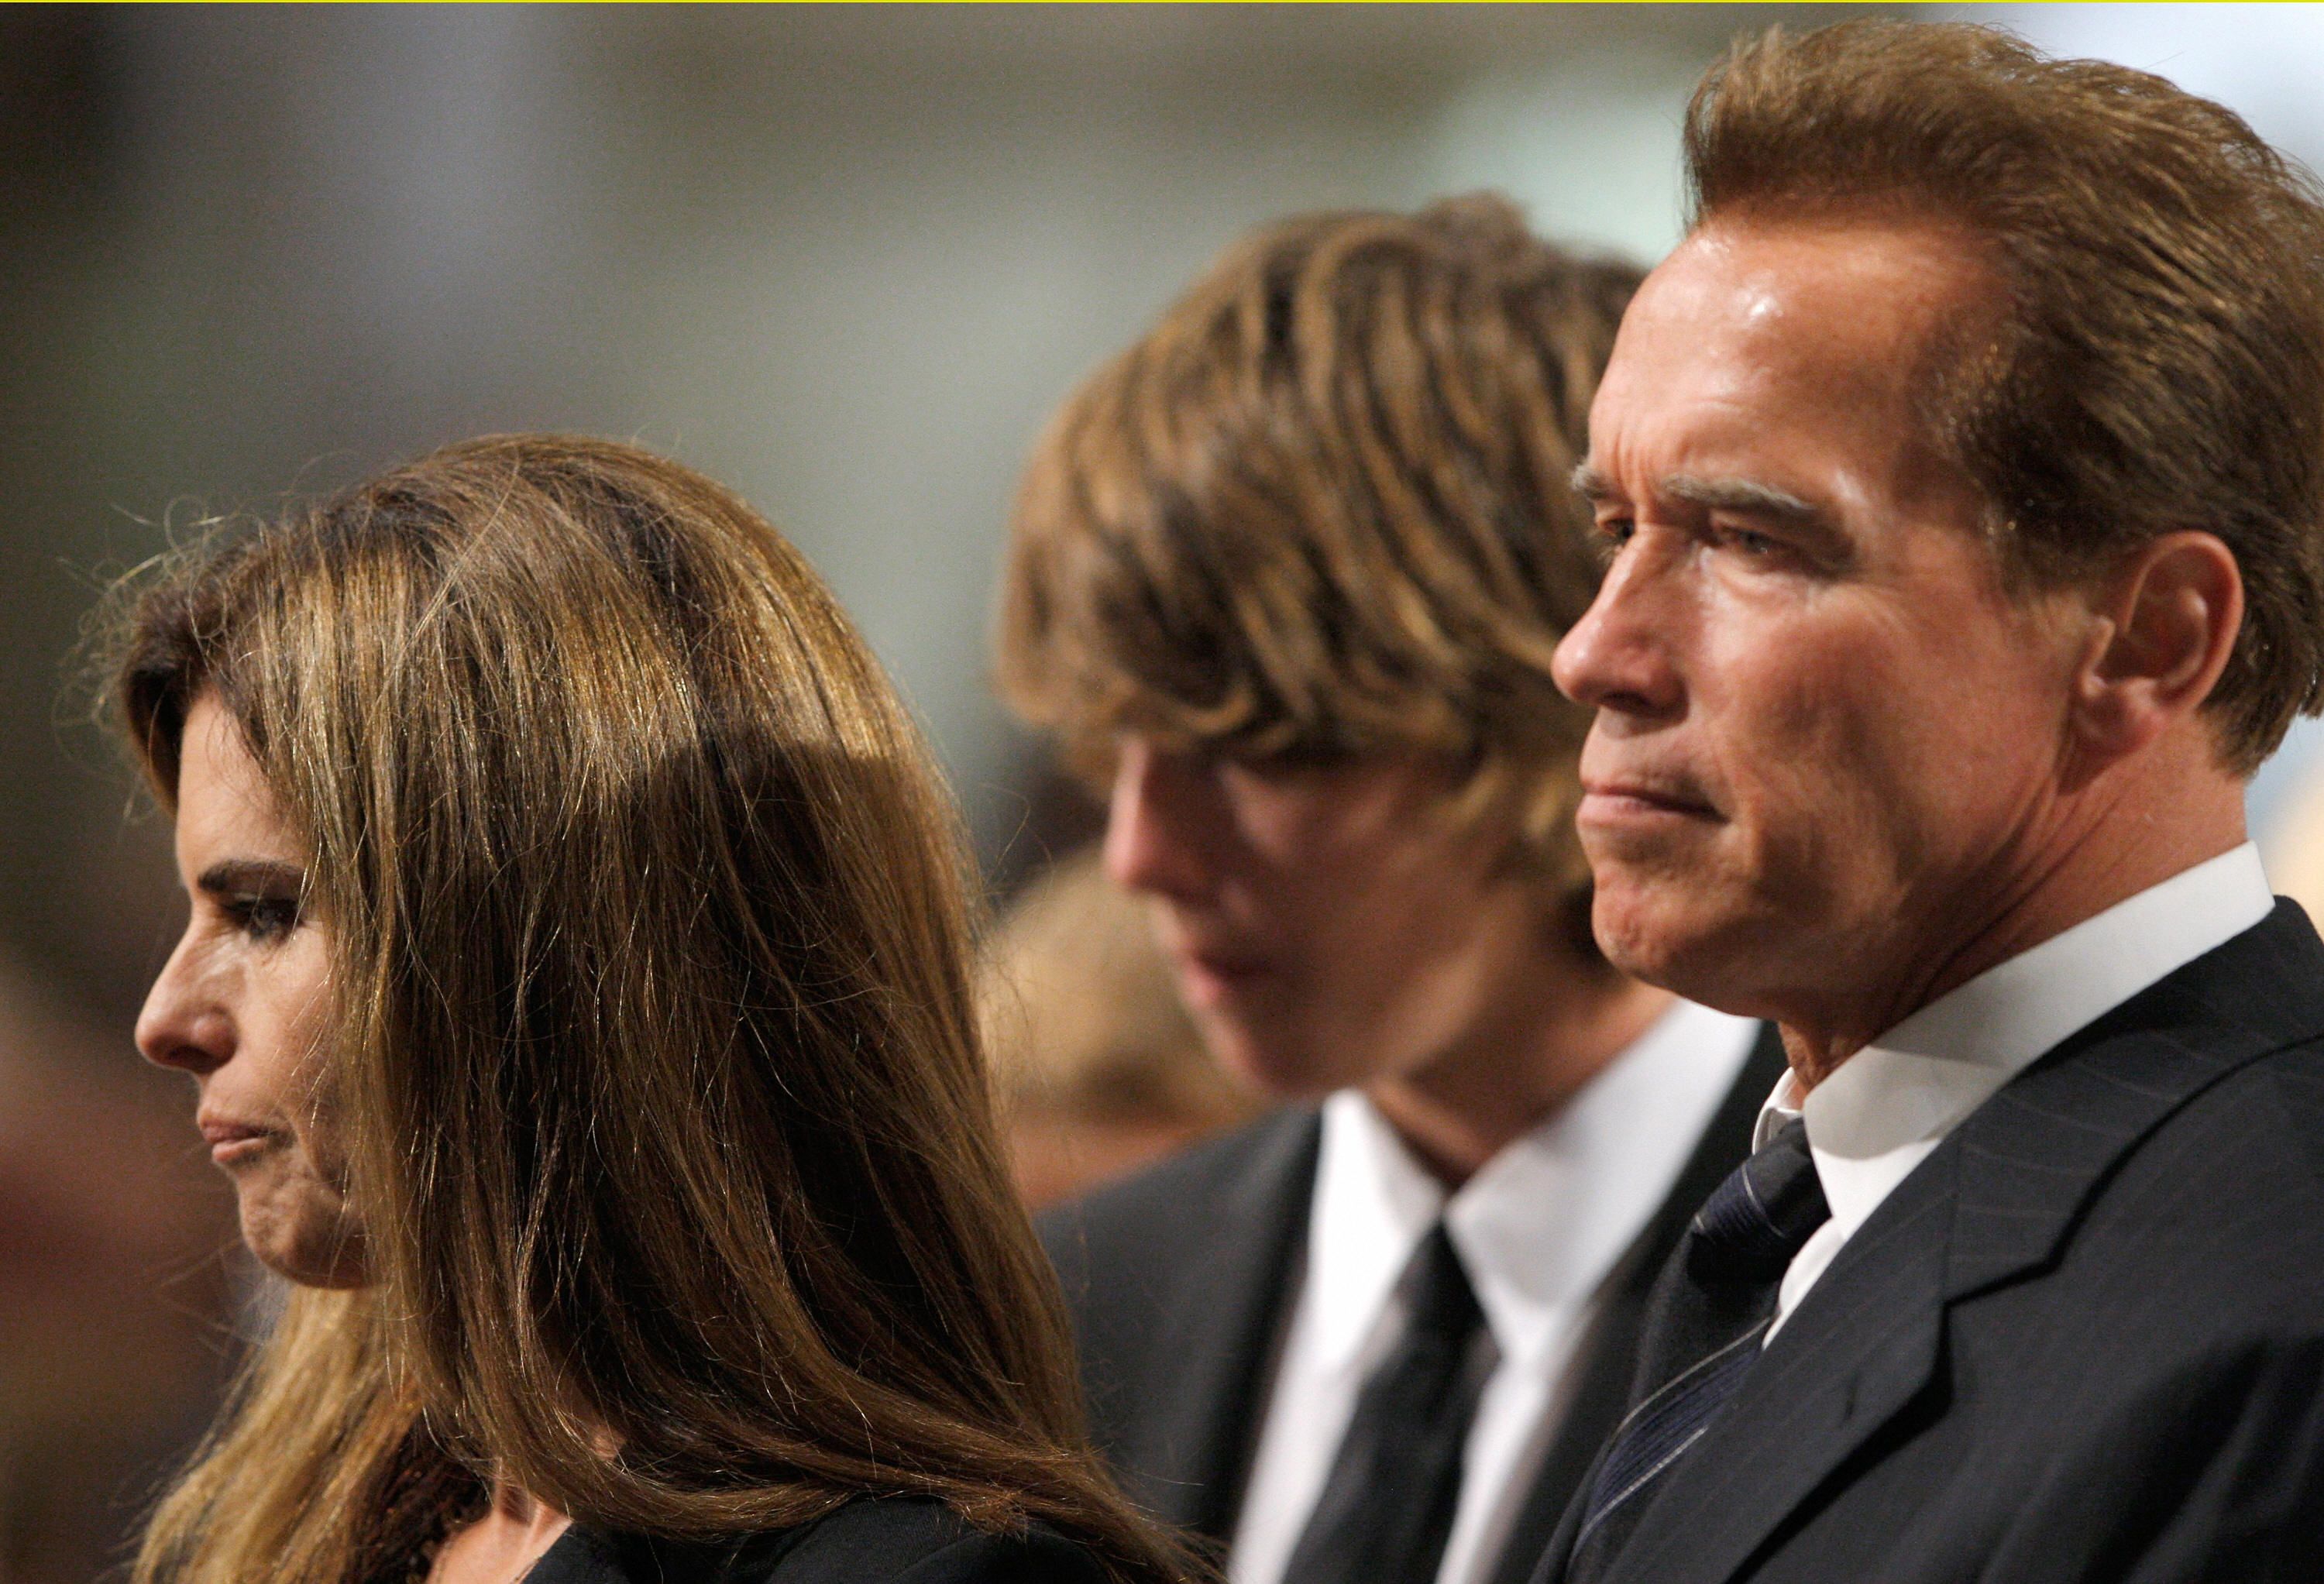 Maria Shriver, niece of US Senator Edward Kennedy, her son Patrick and her husband Arnold Schwarzenegger attend funeral services for Ted Kennedy at the Basilica of Our Lady of Perpetual Help in Boston on August 29, 2009 | Source: Getty Images